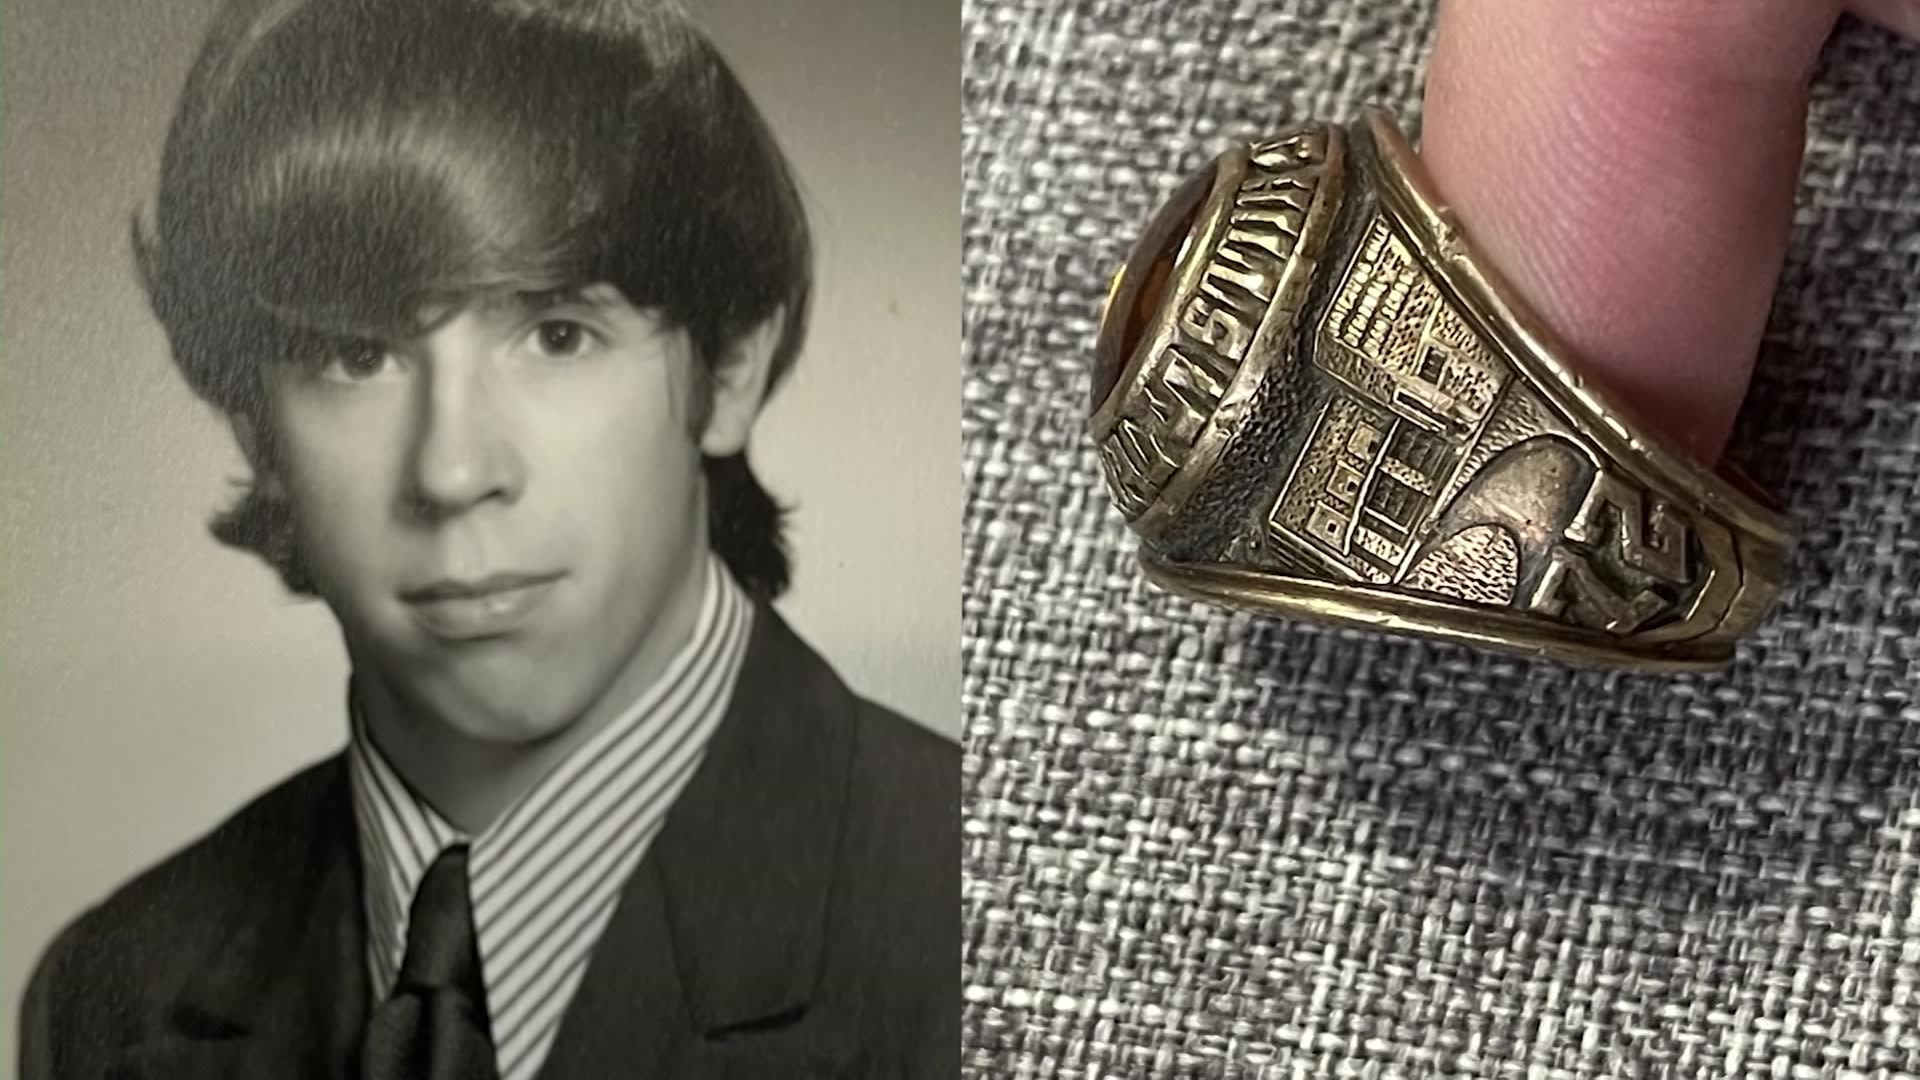 New Jersey man reunited with high school class ring lost for 5 decades